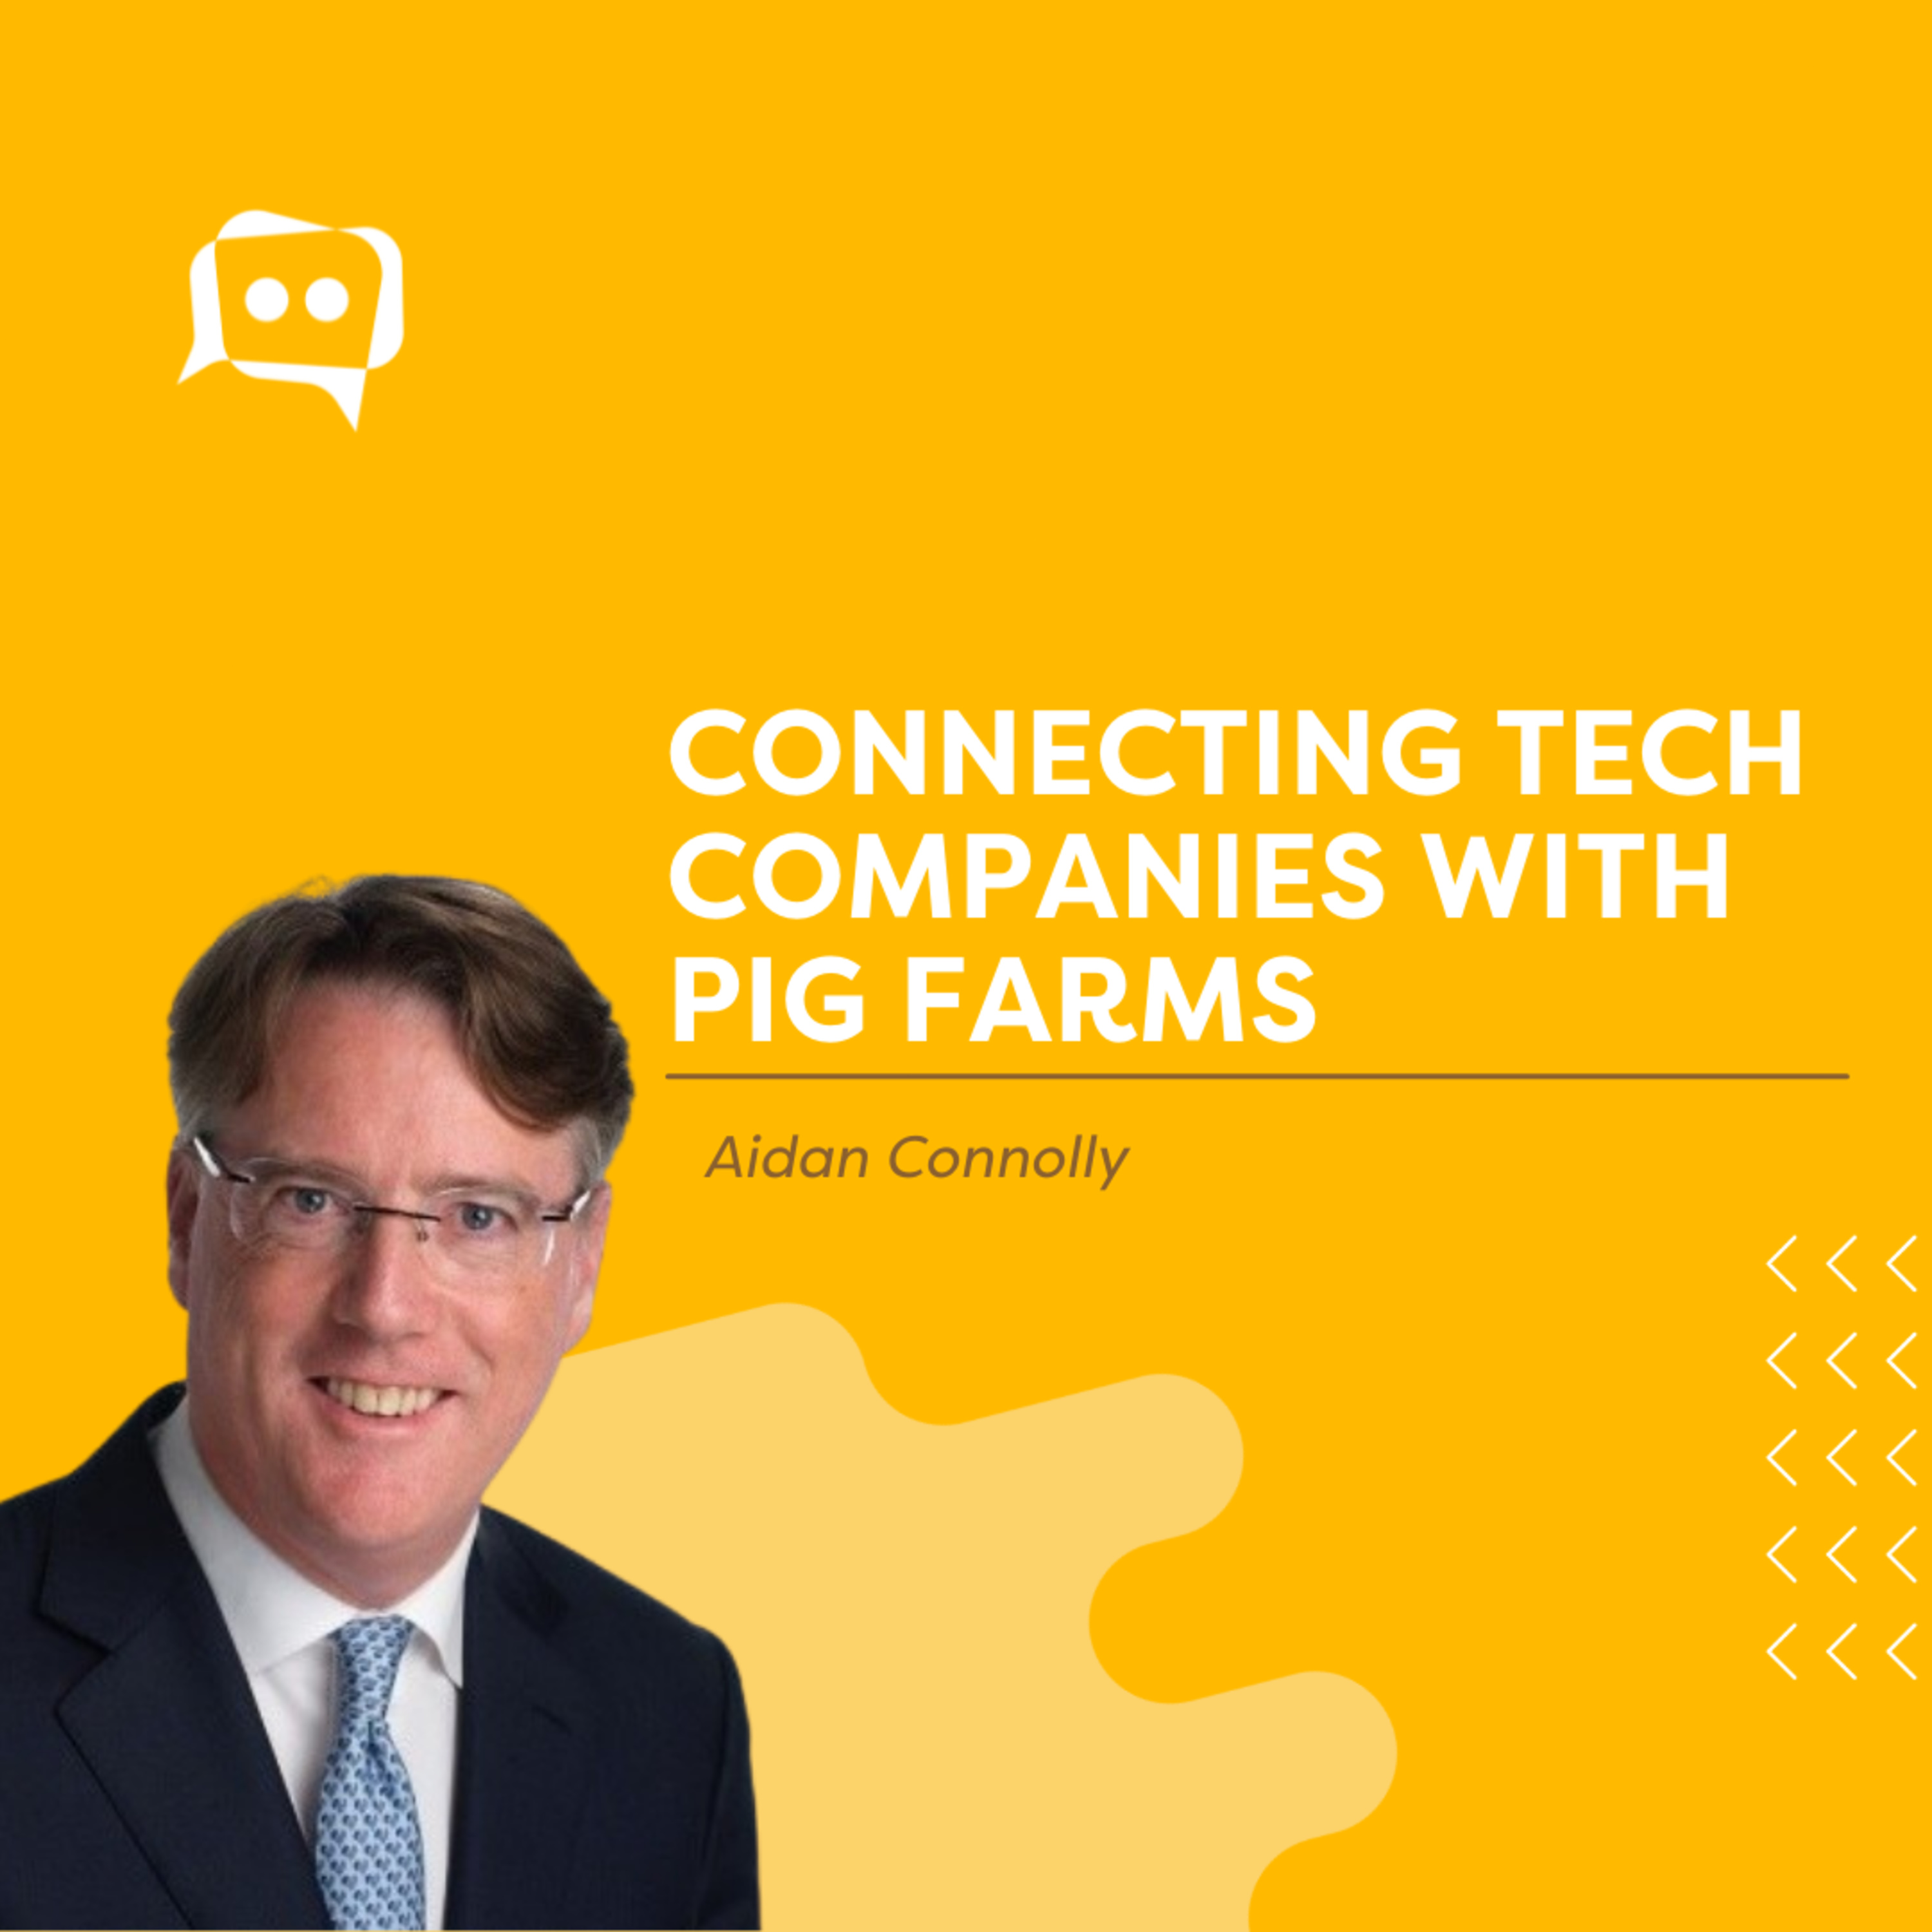 #SHORTS: Connecting tech companies with pig farms, with Aidan Connolly